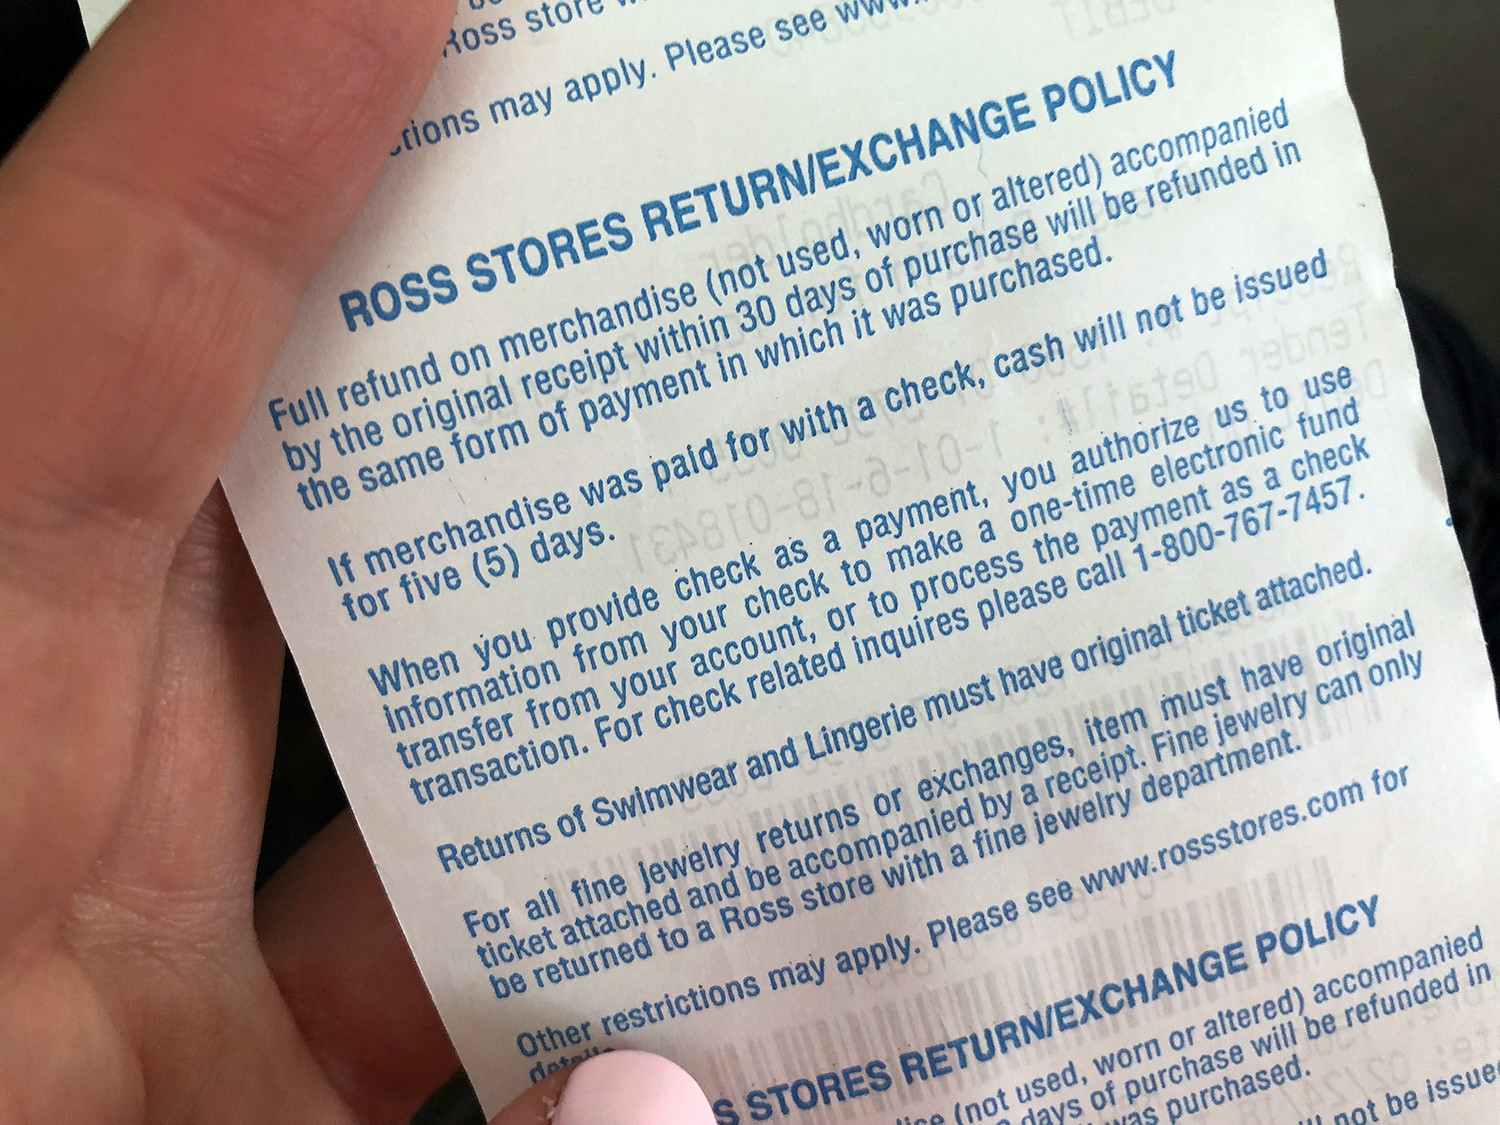 Returns for refund at Ross must be made within 30 days of purchase or are subject to the current selling price.